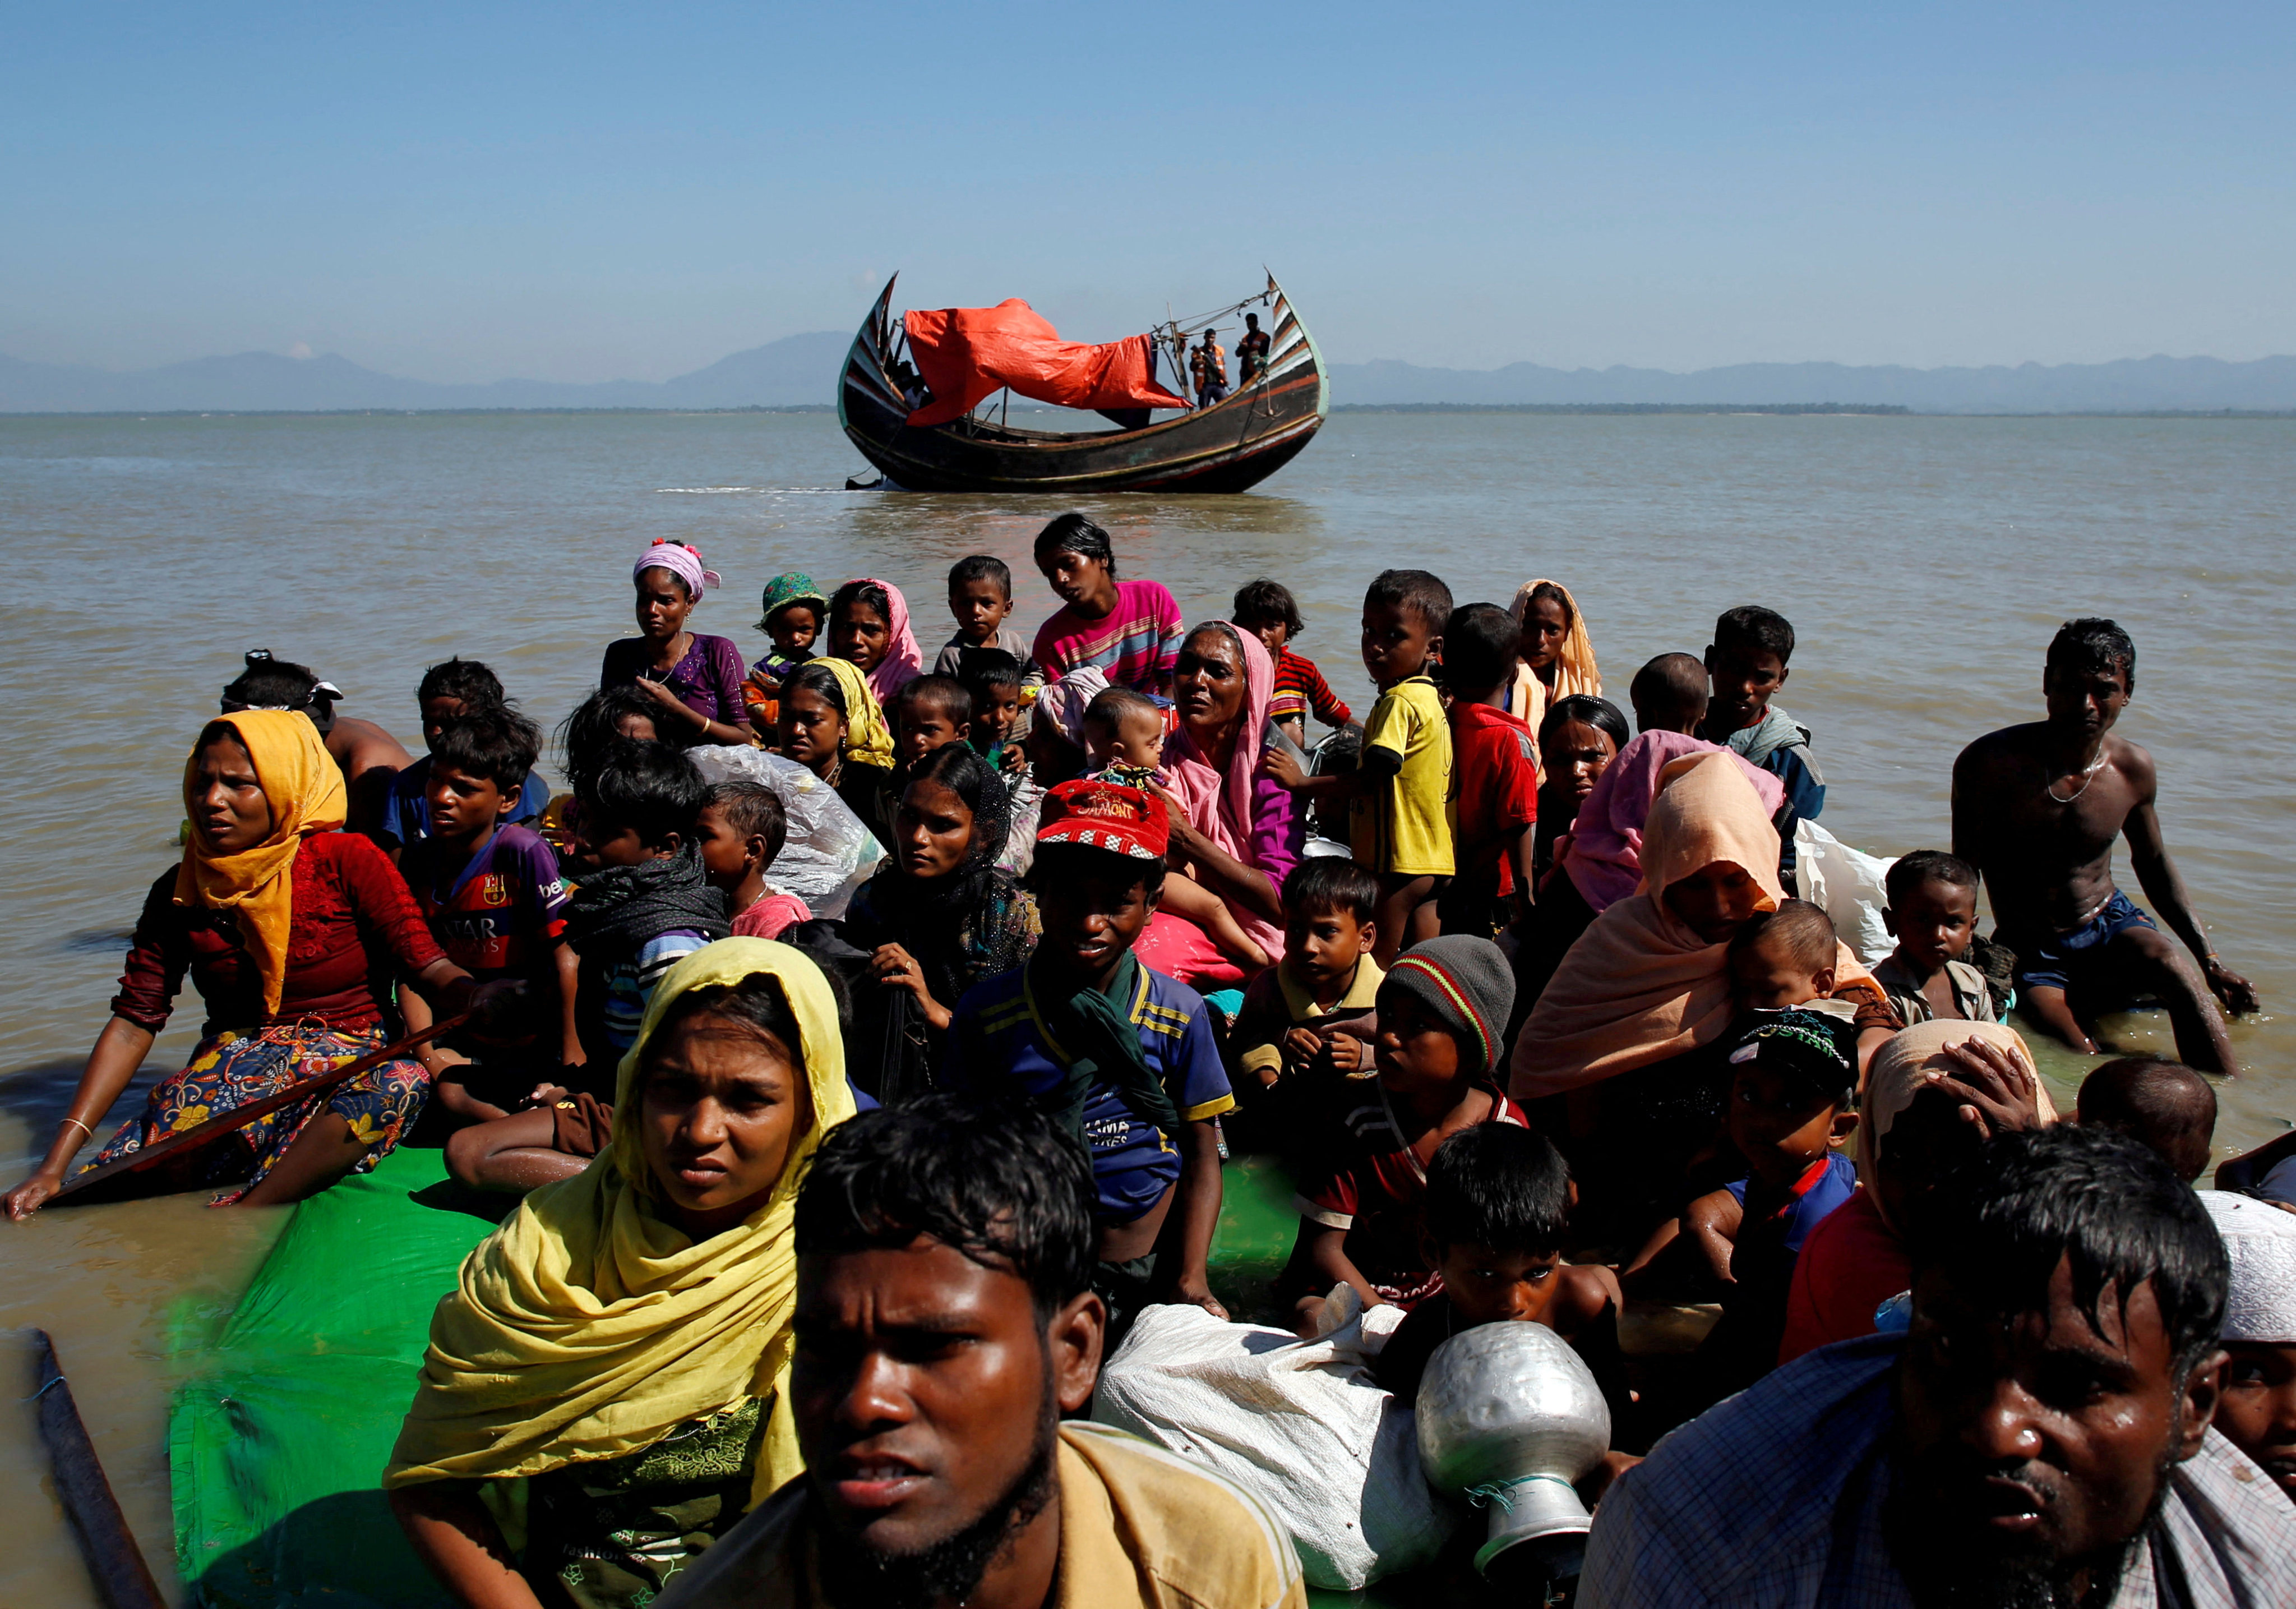 Rohingya refugees sit on a makeshift boat after crossing the Bangladesh-Myanmar border in 2017. Photo: Reuters